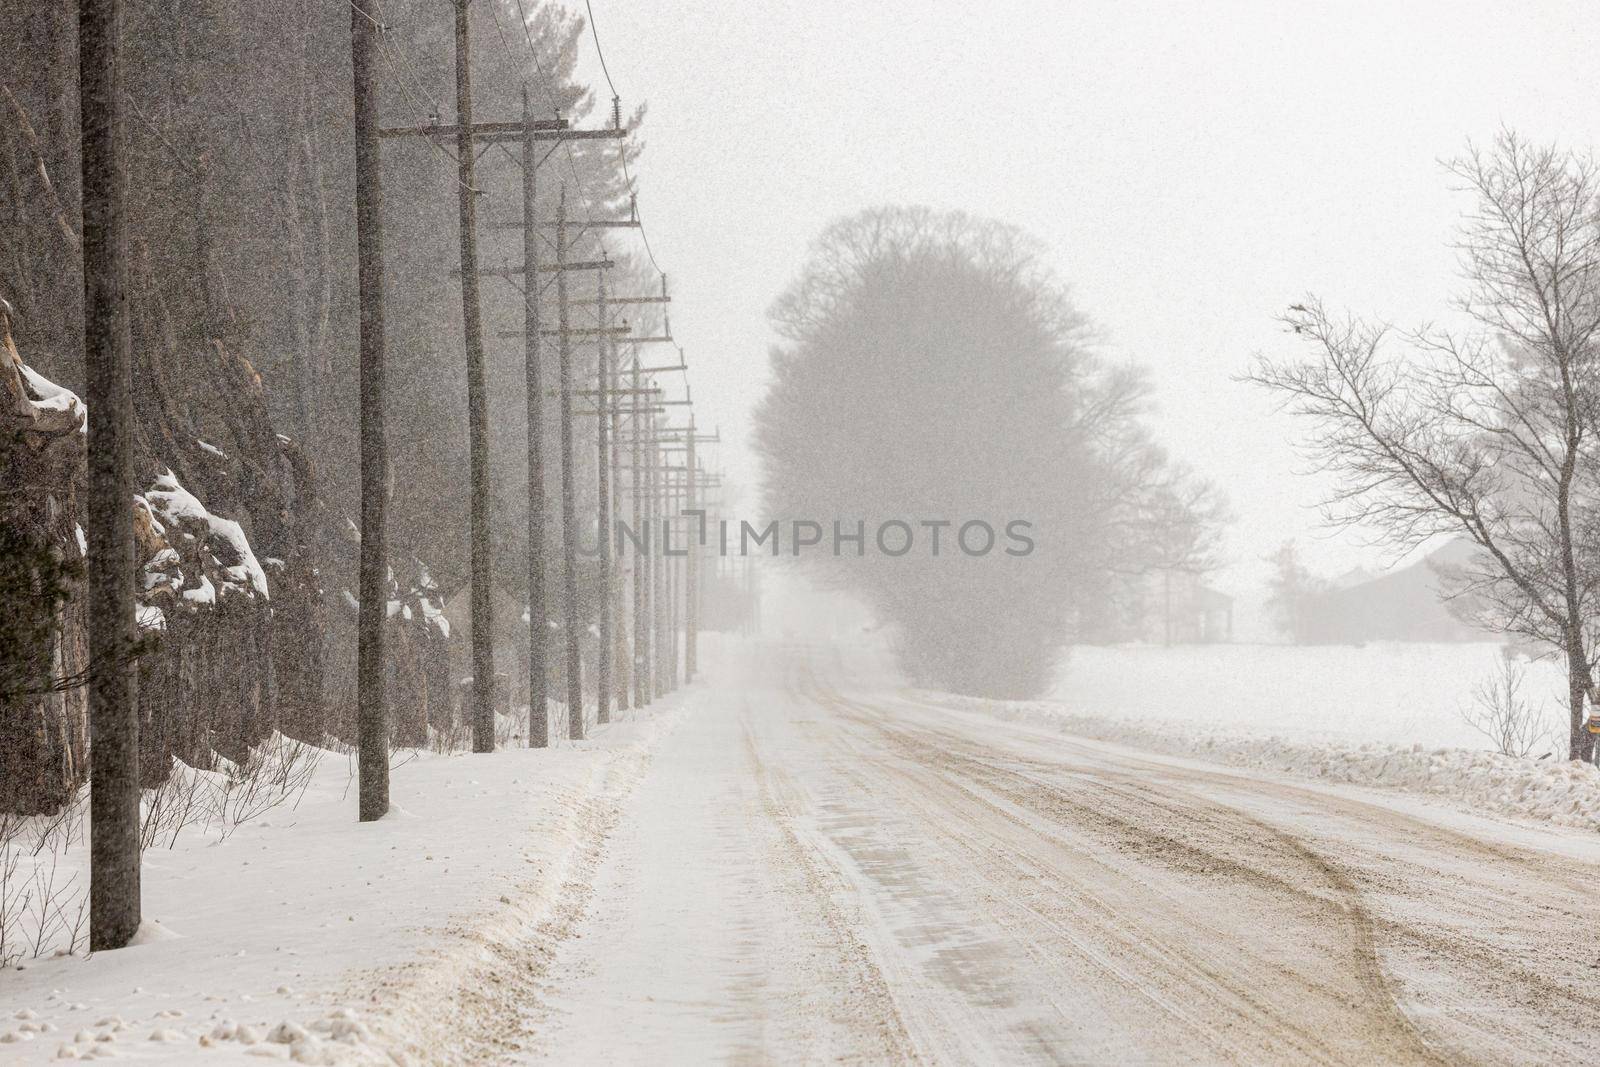 Snow Squall Conditions on a Country Road in Ontario Canada by markvandam